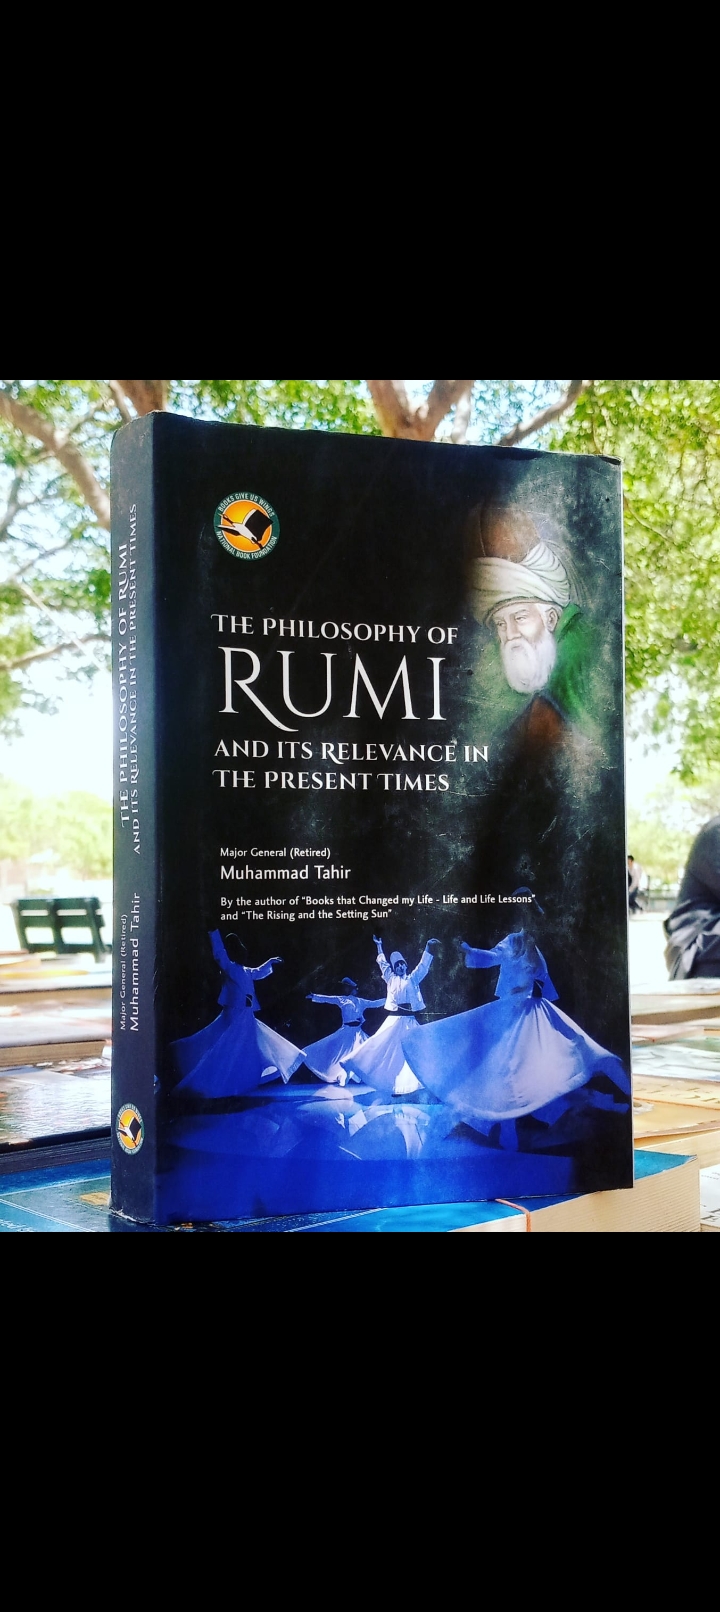 the philosophy of rumi and its relevance in the present times by m.tahir. original hardcover